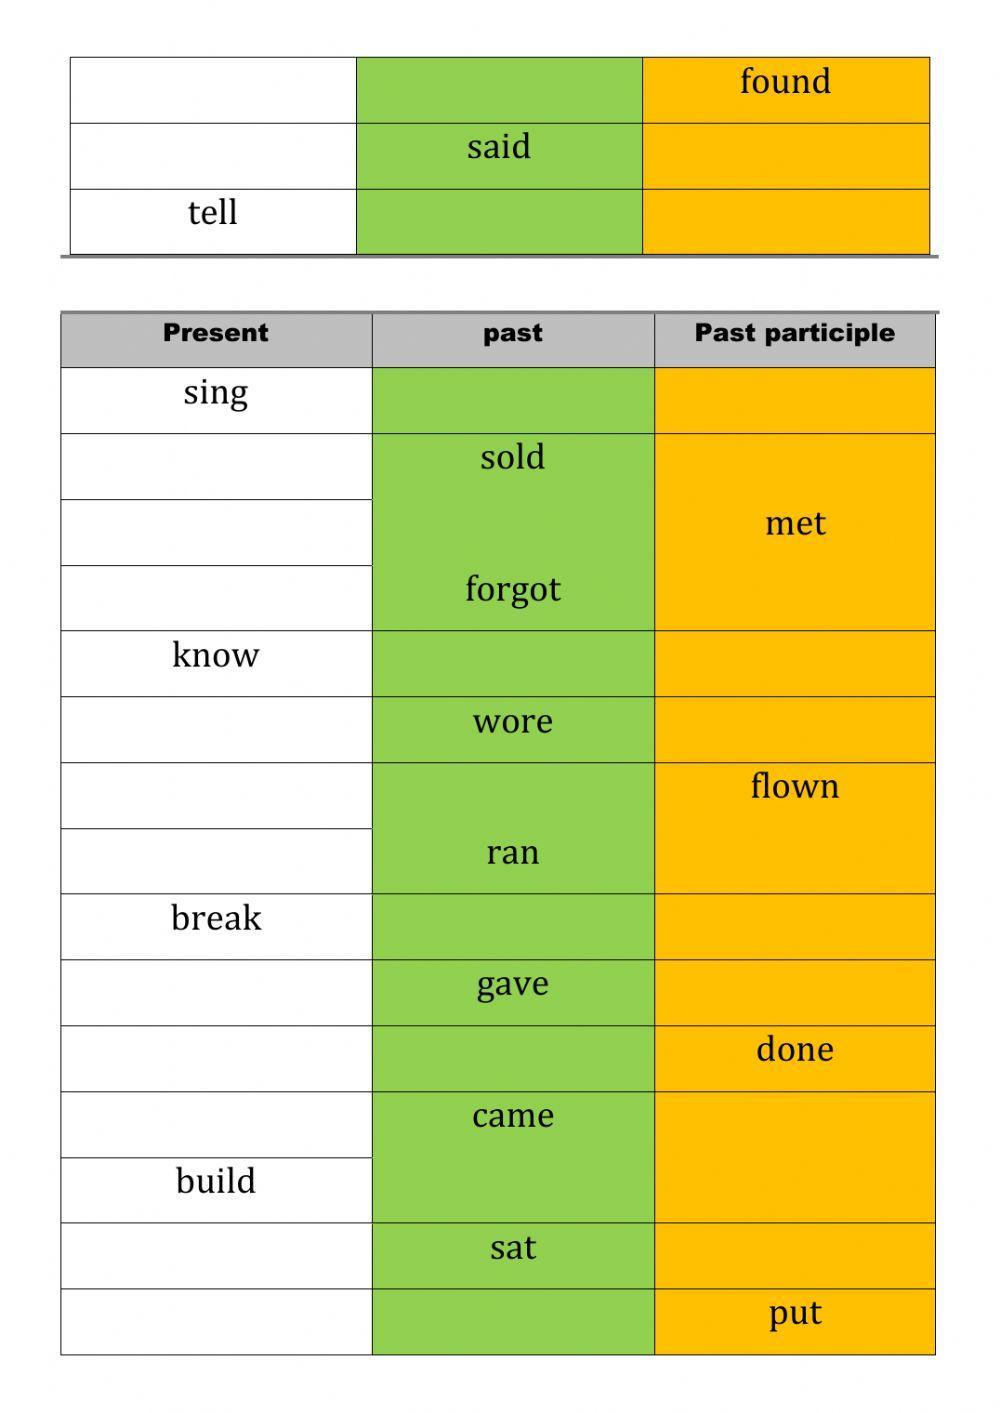 Past and past participle of verbs